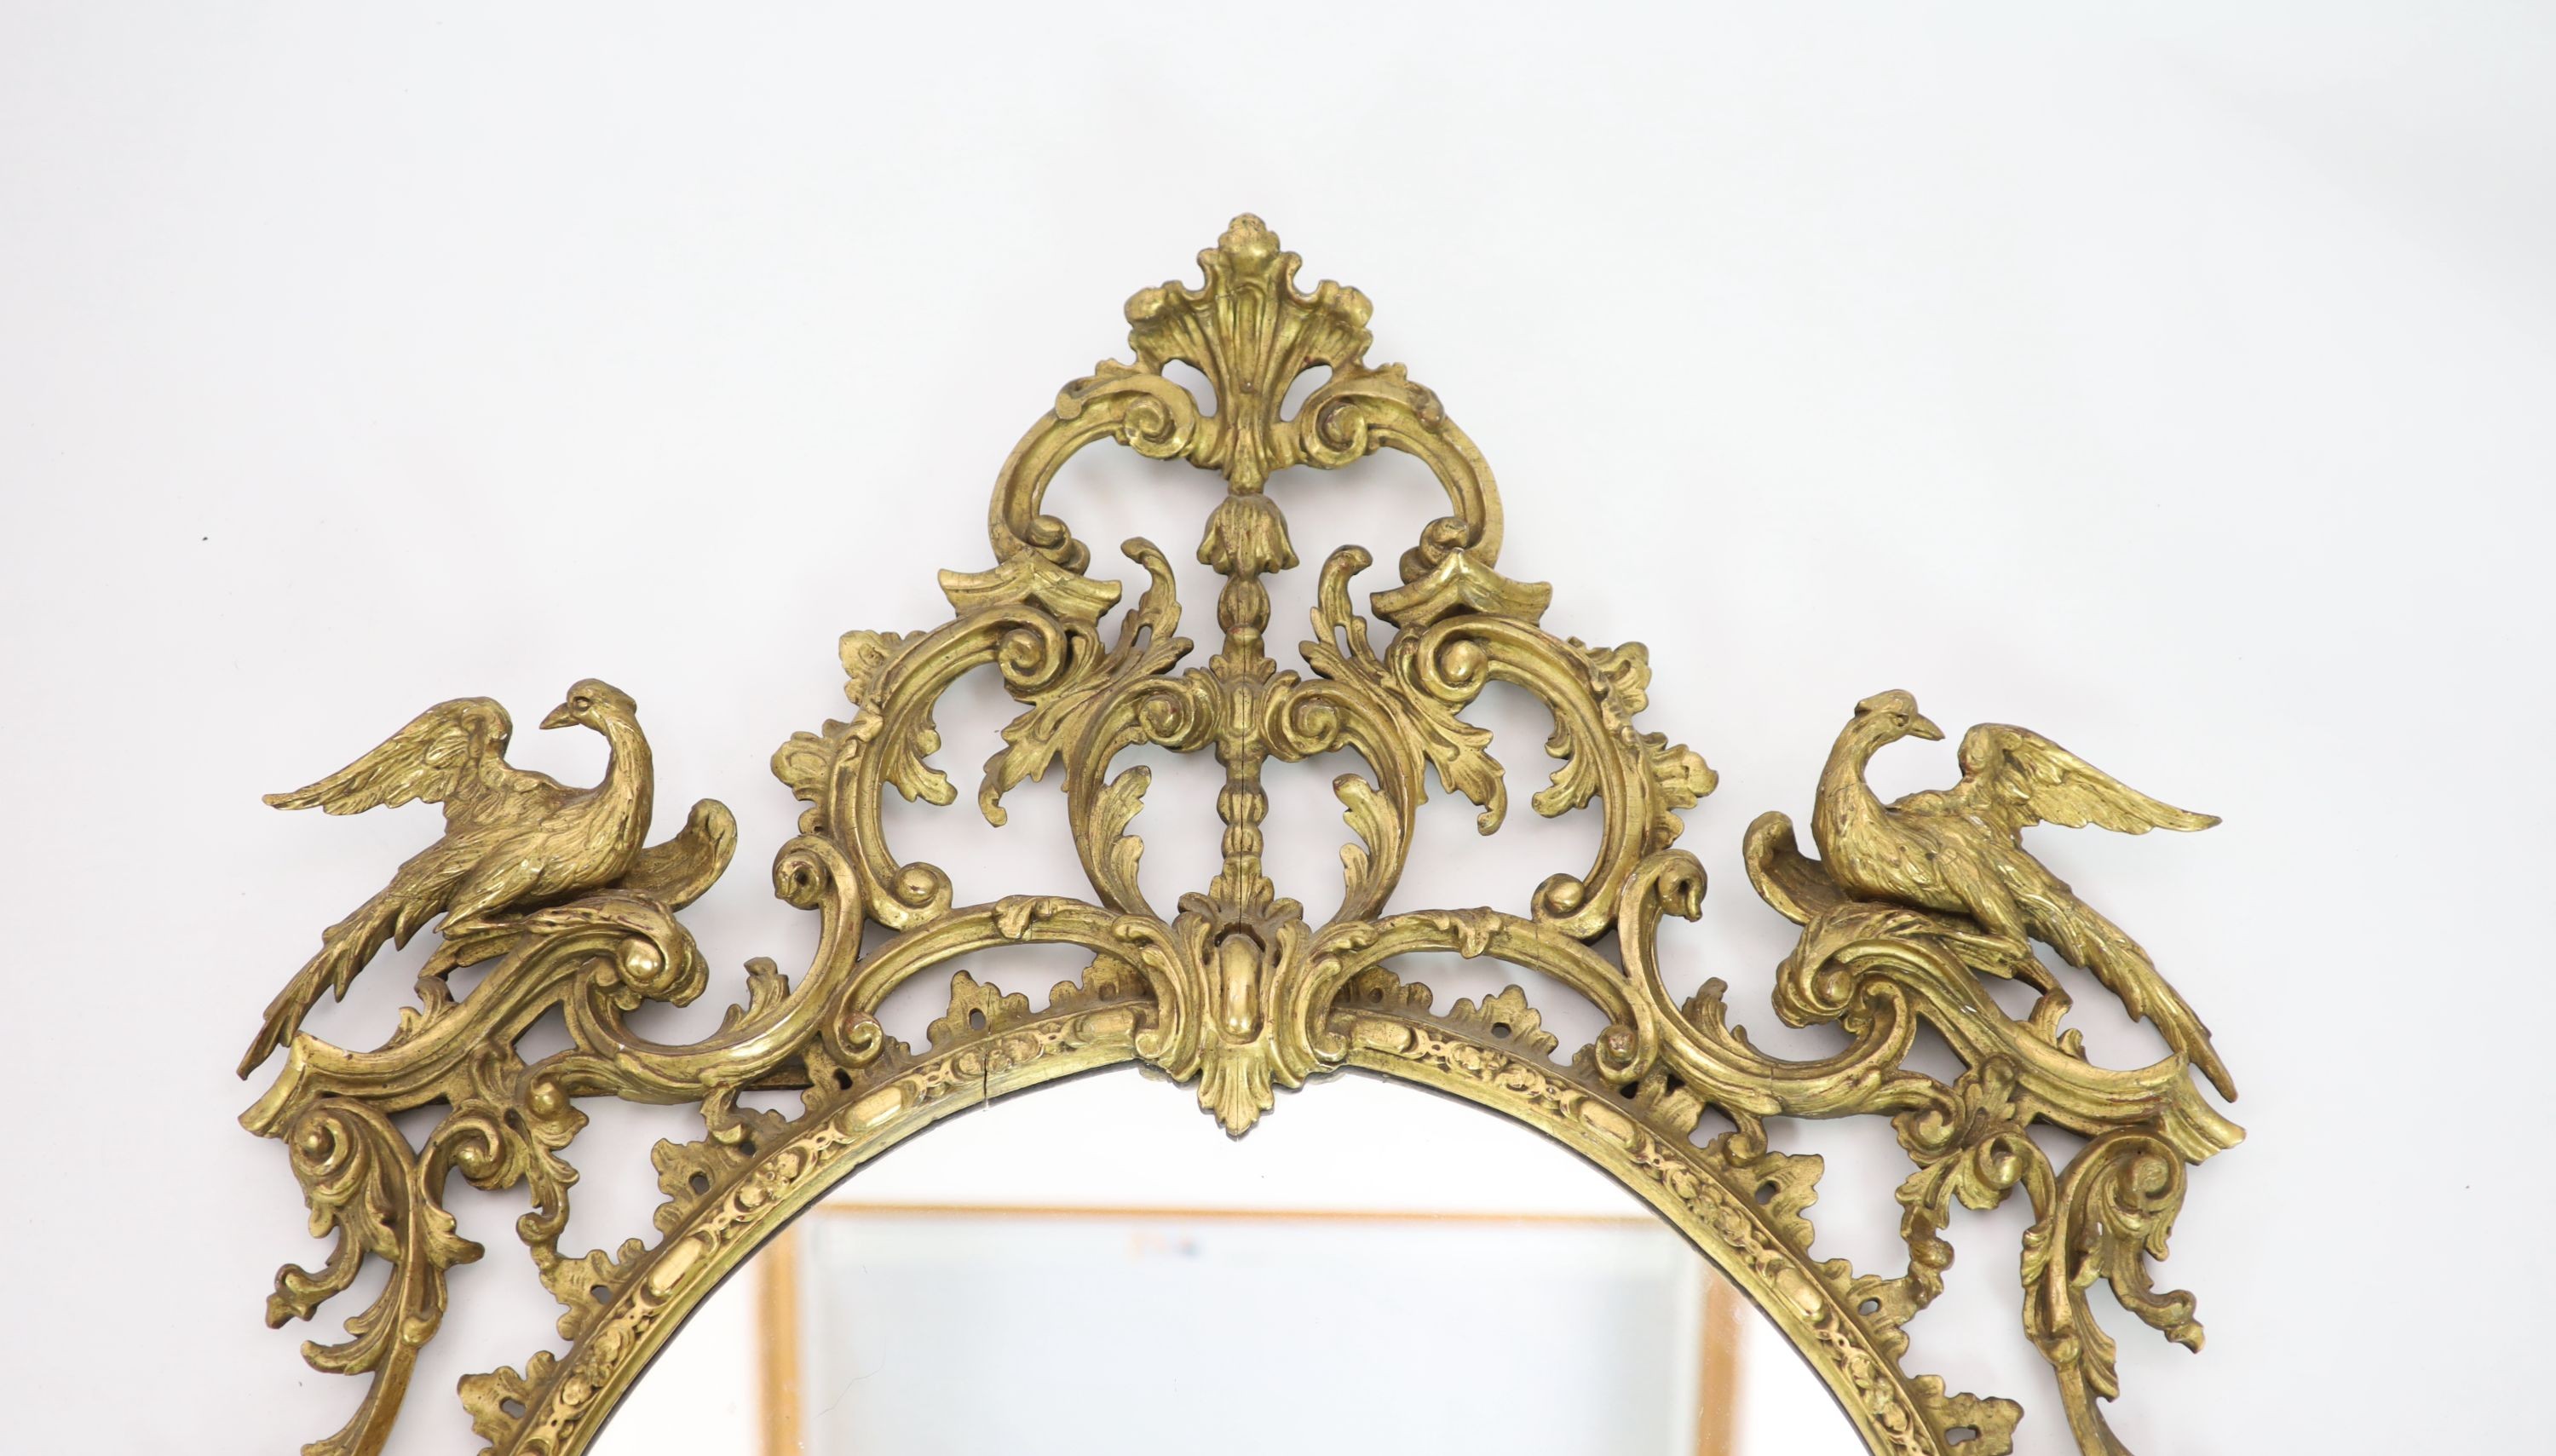 A 19th century Chippendale style gilt and gesso wall mirrorwith ornate foliate scroll frame capped - Image 3 of 5